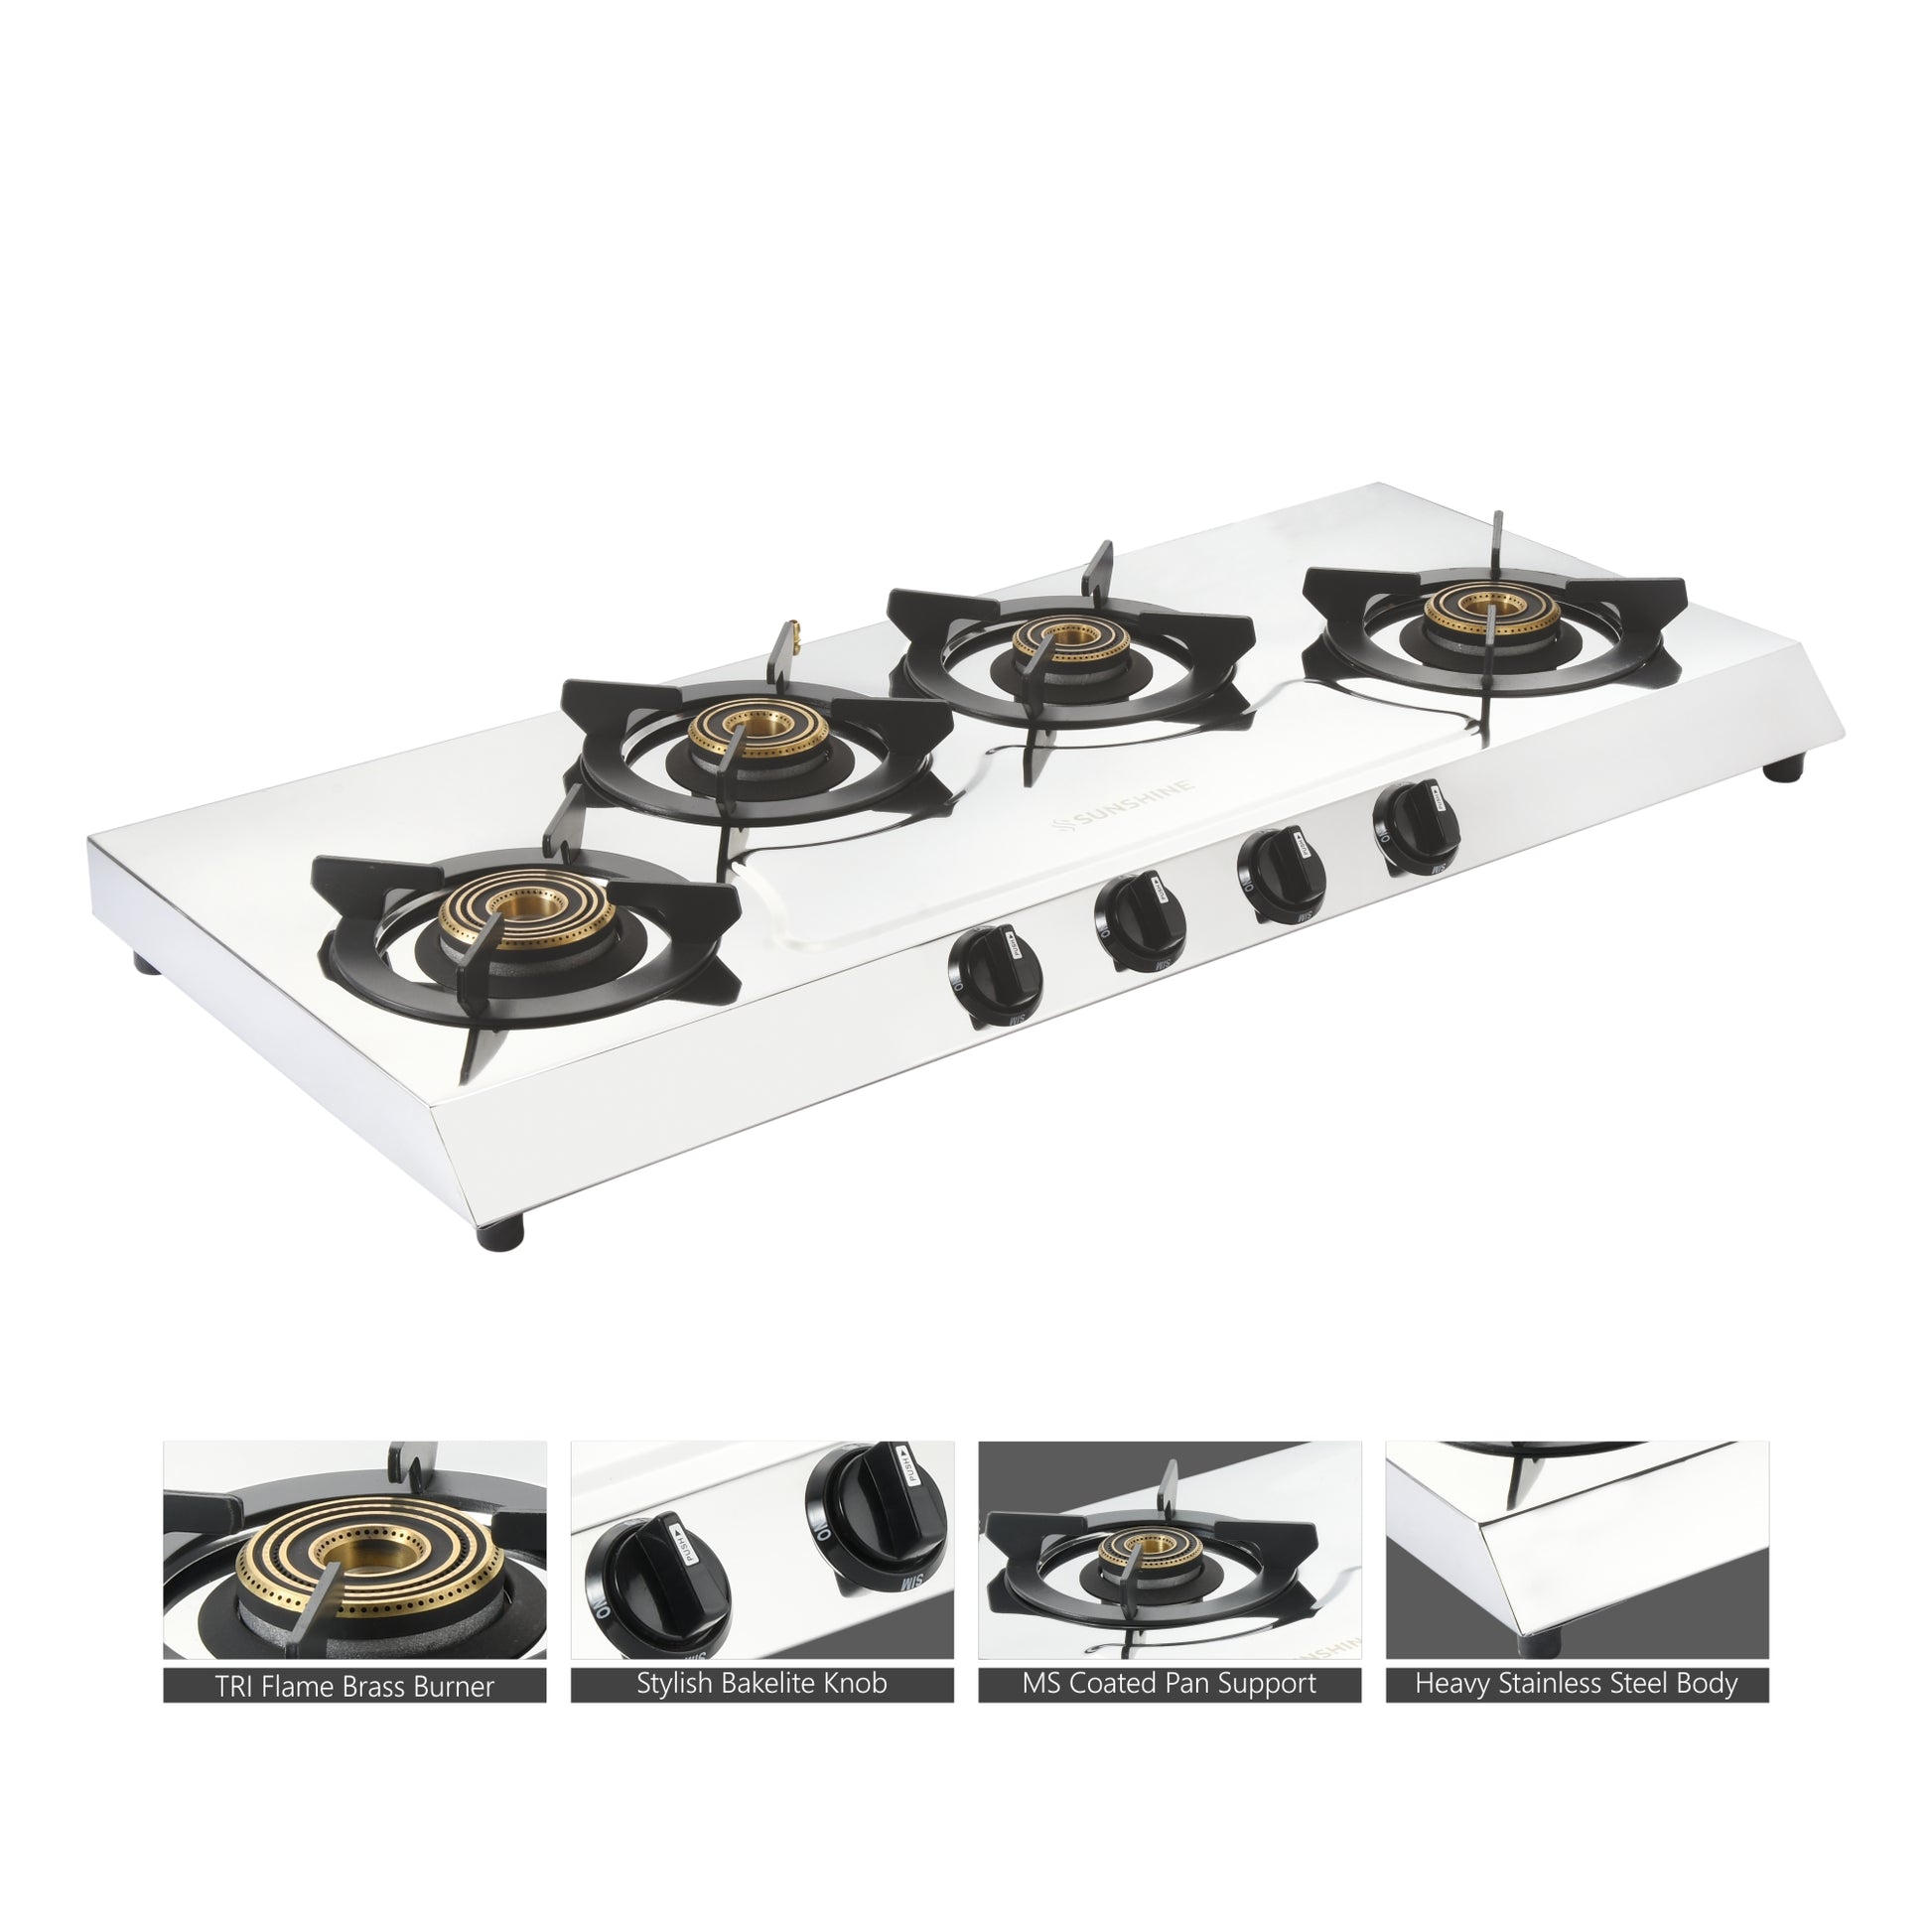 Sunshine Magistic Four Burner Stainless Steel Gas Stove Manual Ignition